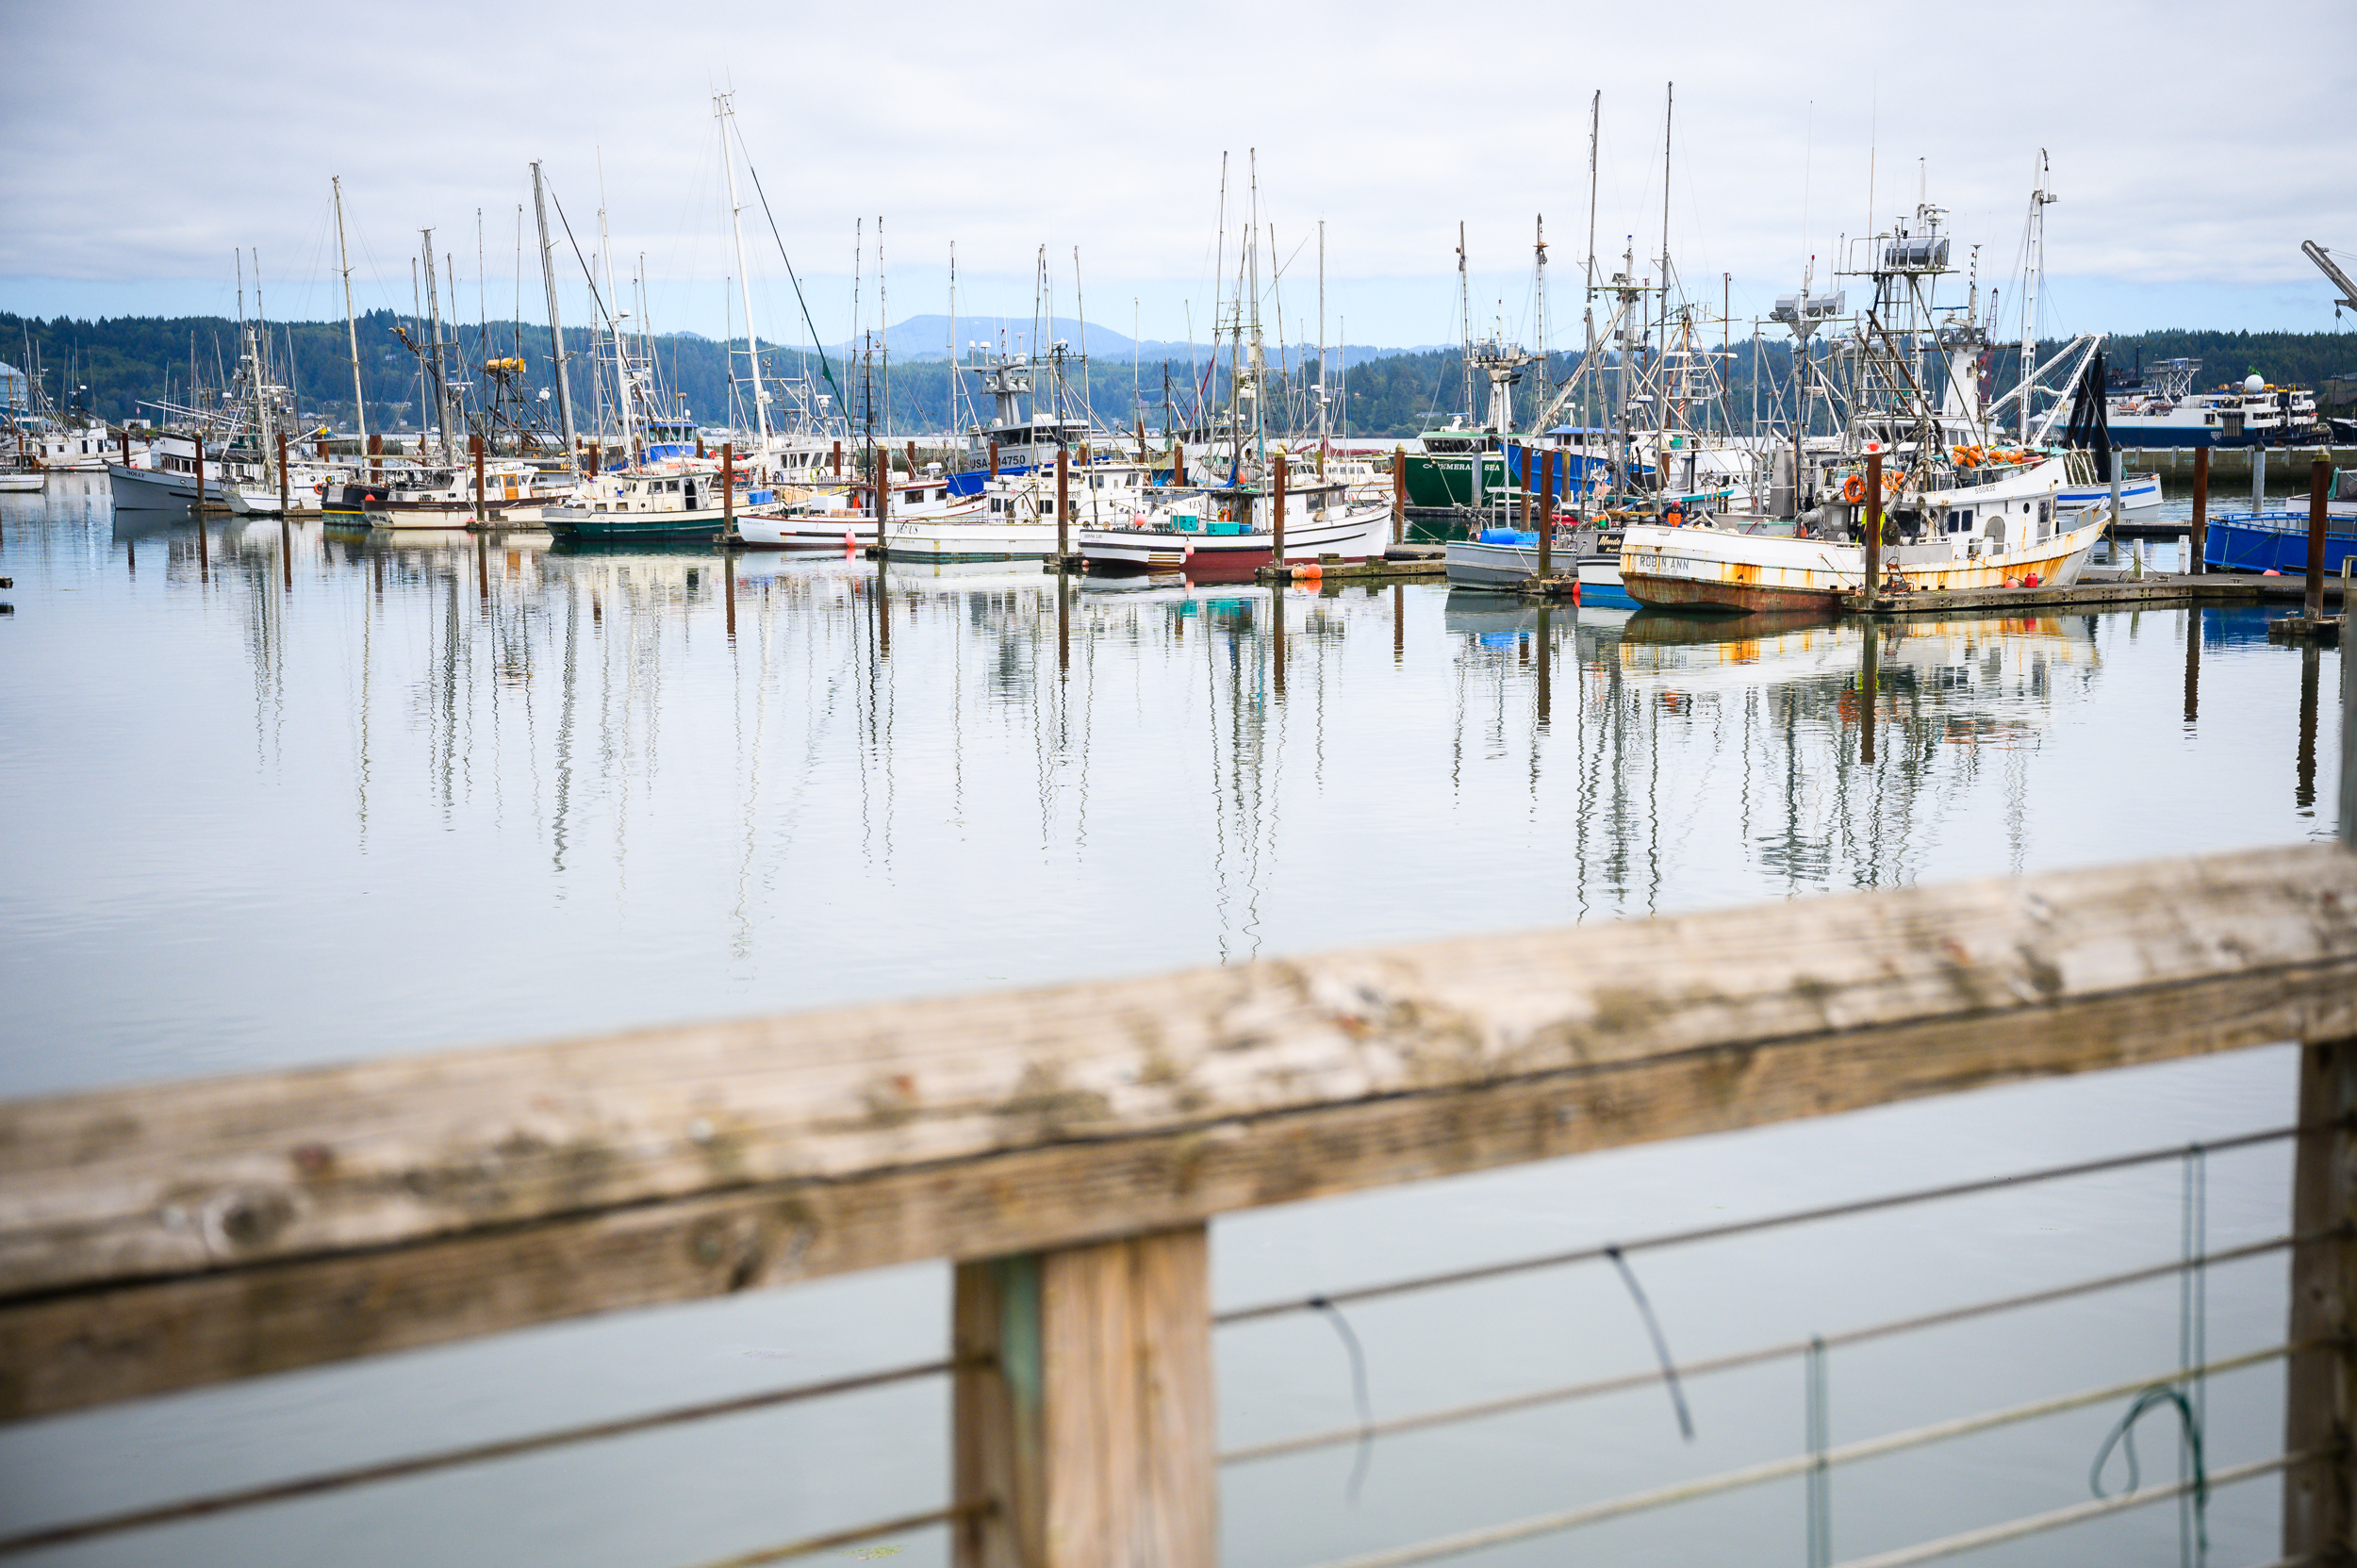 Boats lined up at a dock in Newport, Oregon.